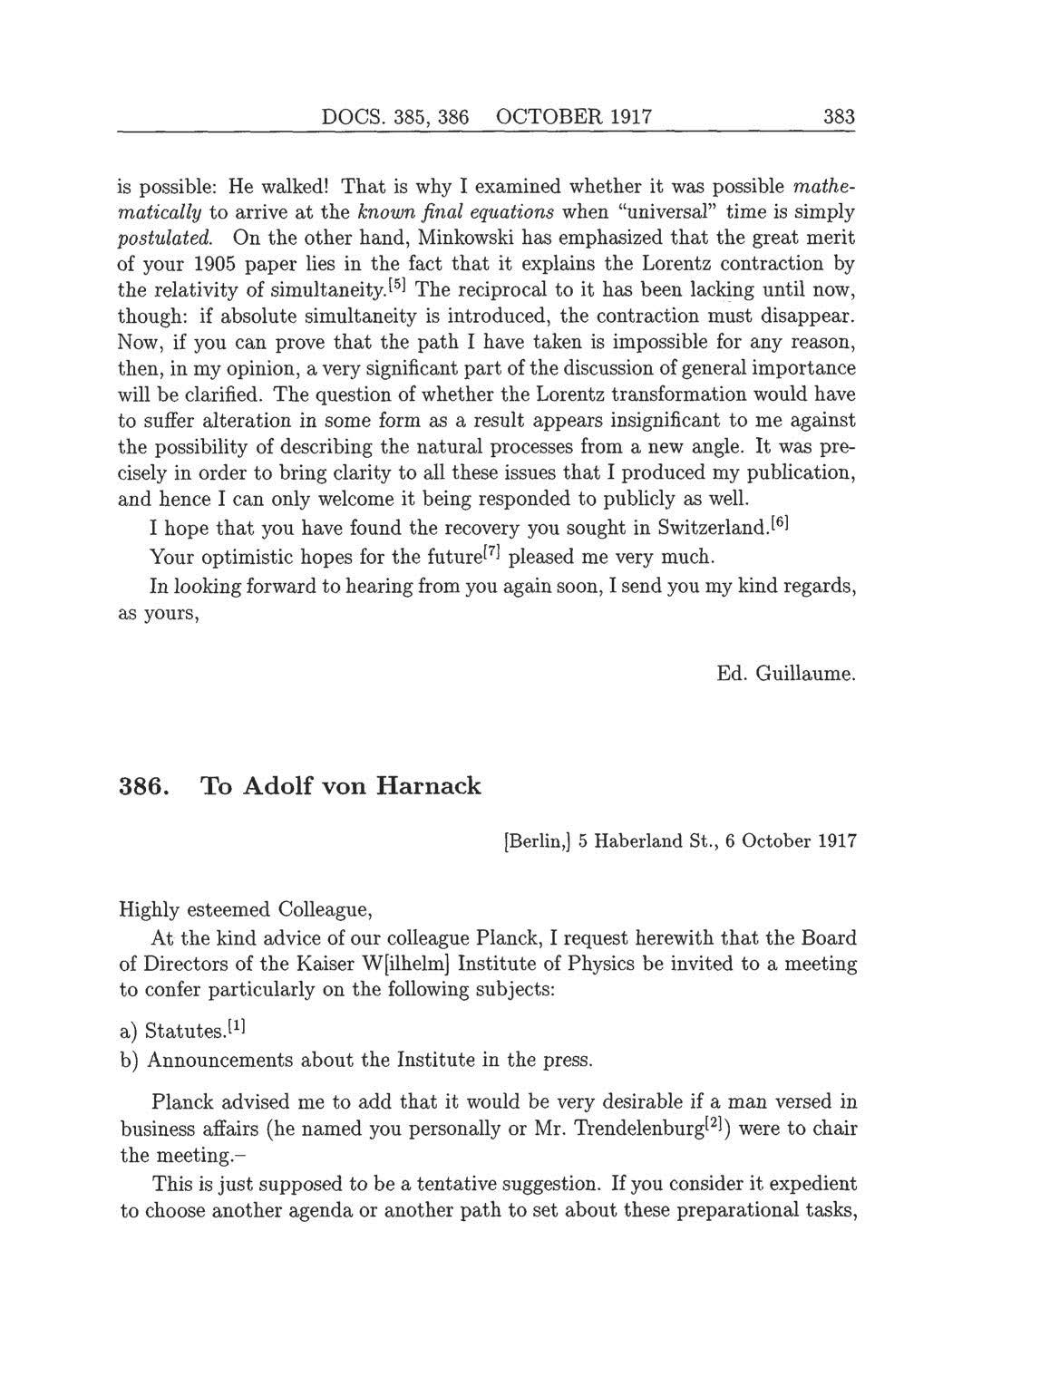 Volume 8: The Berlin Years: Correspondence, 1914-1918 (English translation supplement) page 383